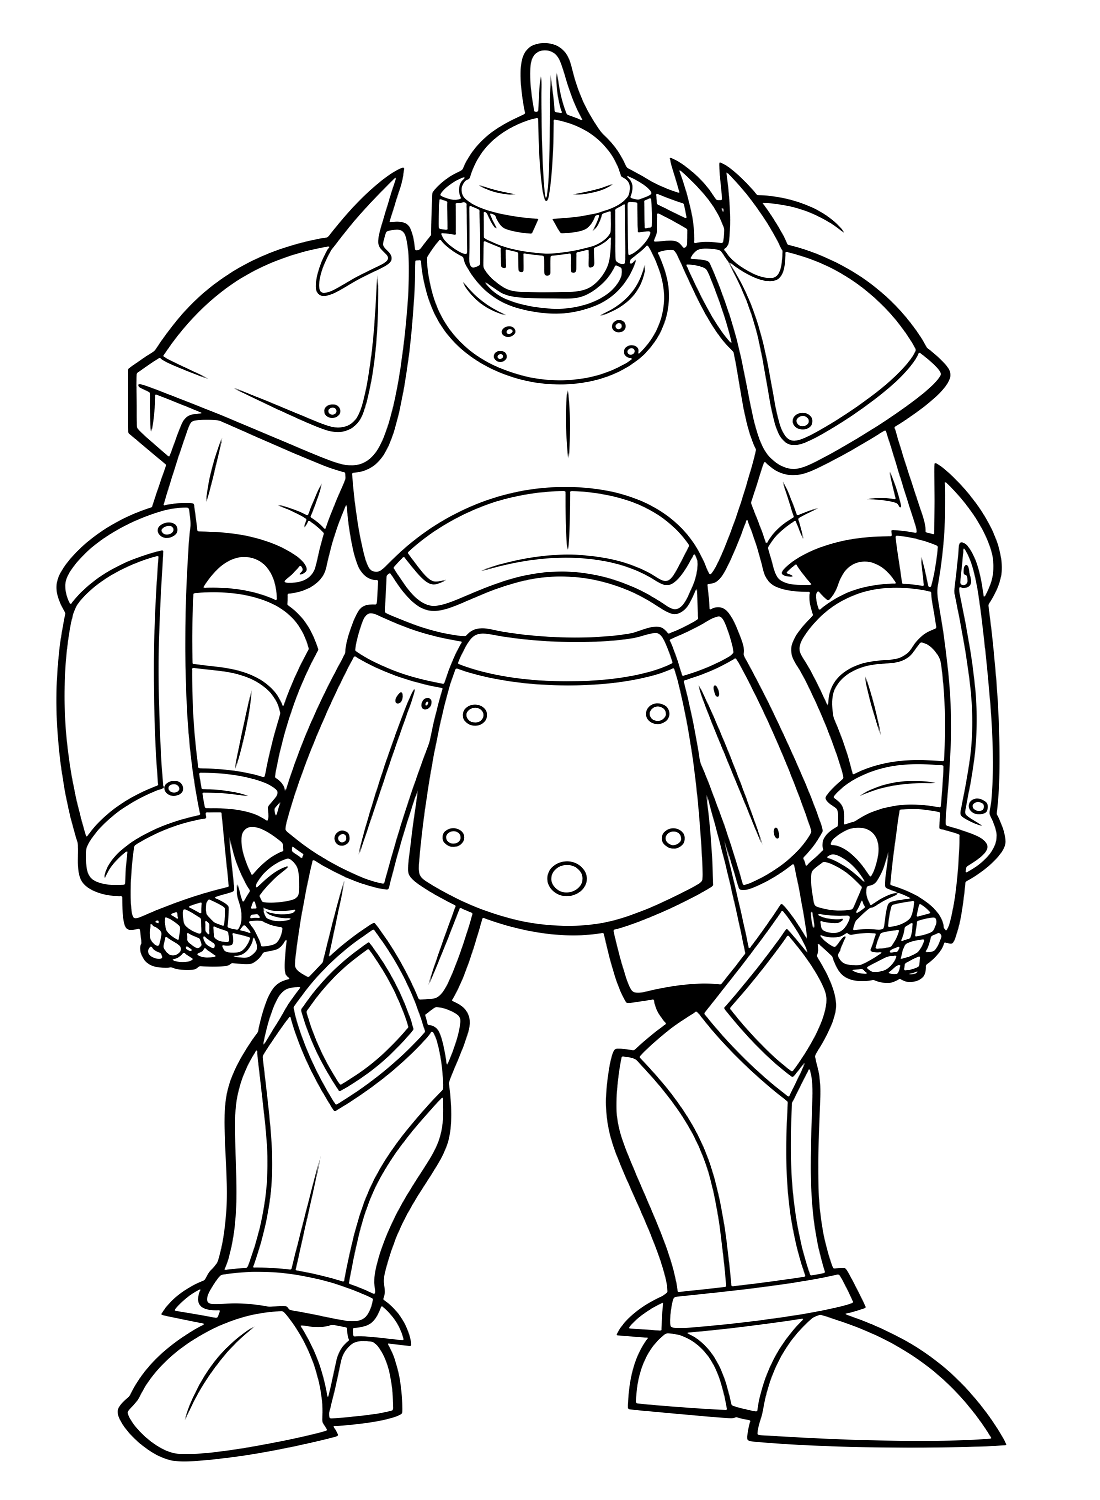 Alphonse Elric Coloring Sheet from Alphonse Elric